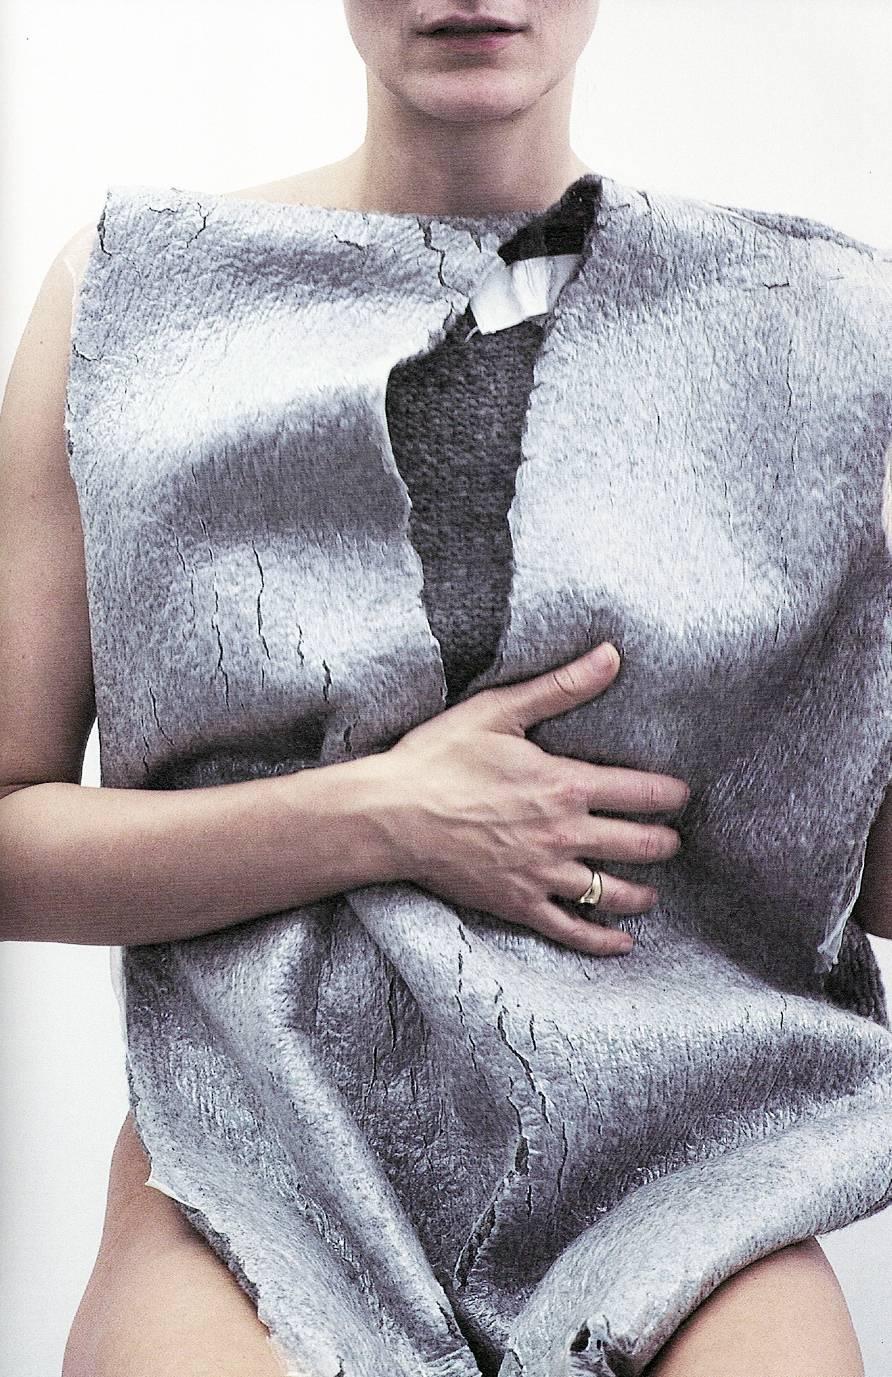 Presenting an archival Martin Margiela grey knitted wool v-neck oversized sweater from the Autumn-Winter 1998 collection, a true testament to the brand's boundary-pushing creativity. This exceptional piece reflects Margiela's artistry and commitment